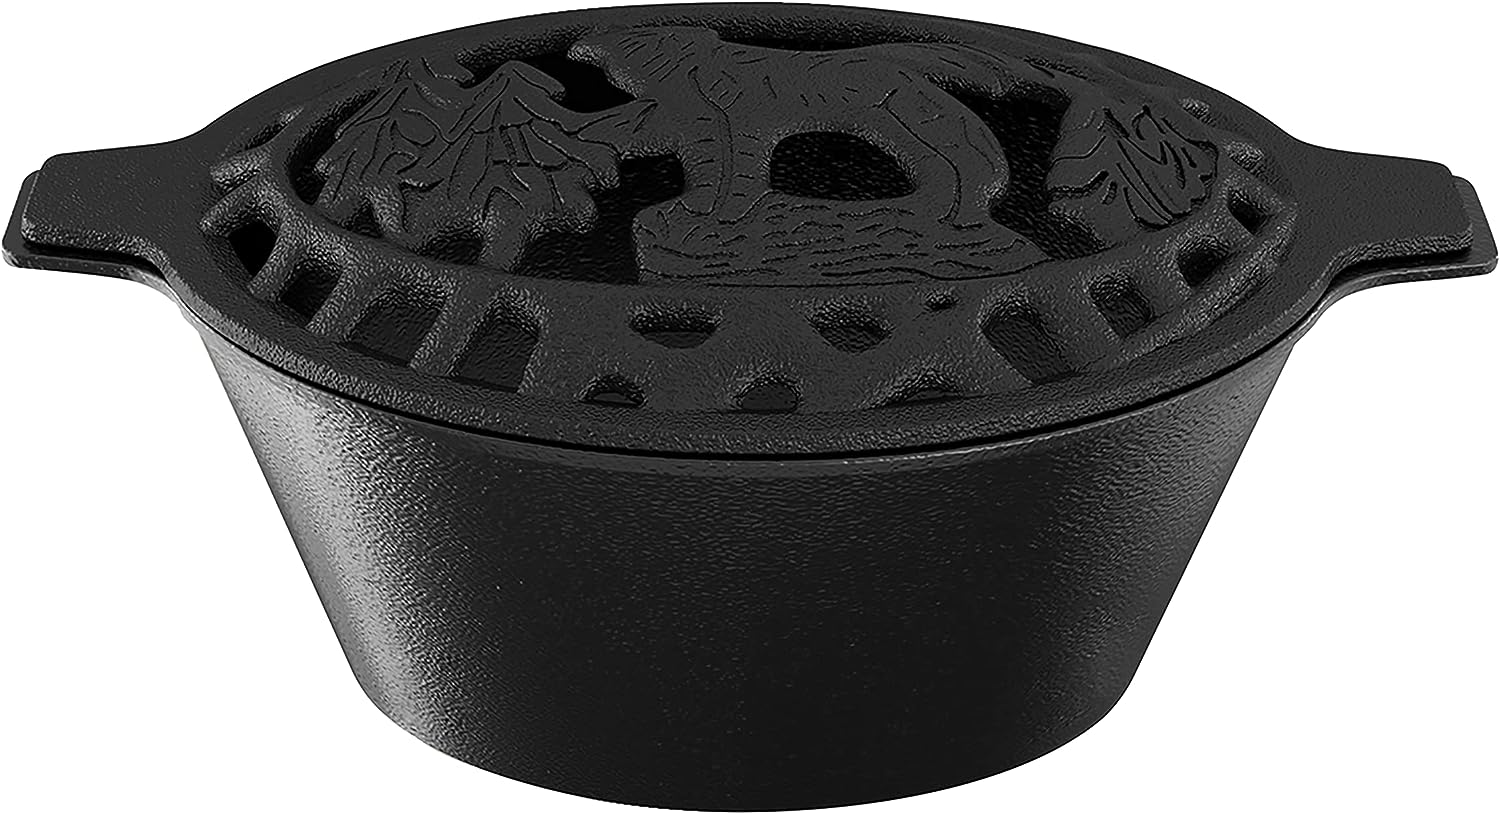 FireBeauty Woodstove Steamer Stove Humidifier Cast Iron Lattice Top Rust Resistant 2.3 Quart Capacity (Wolf)